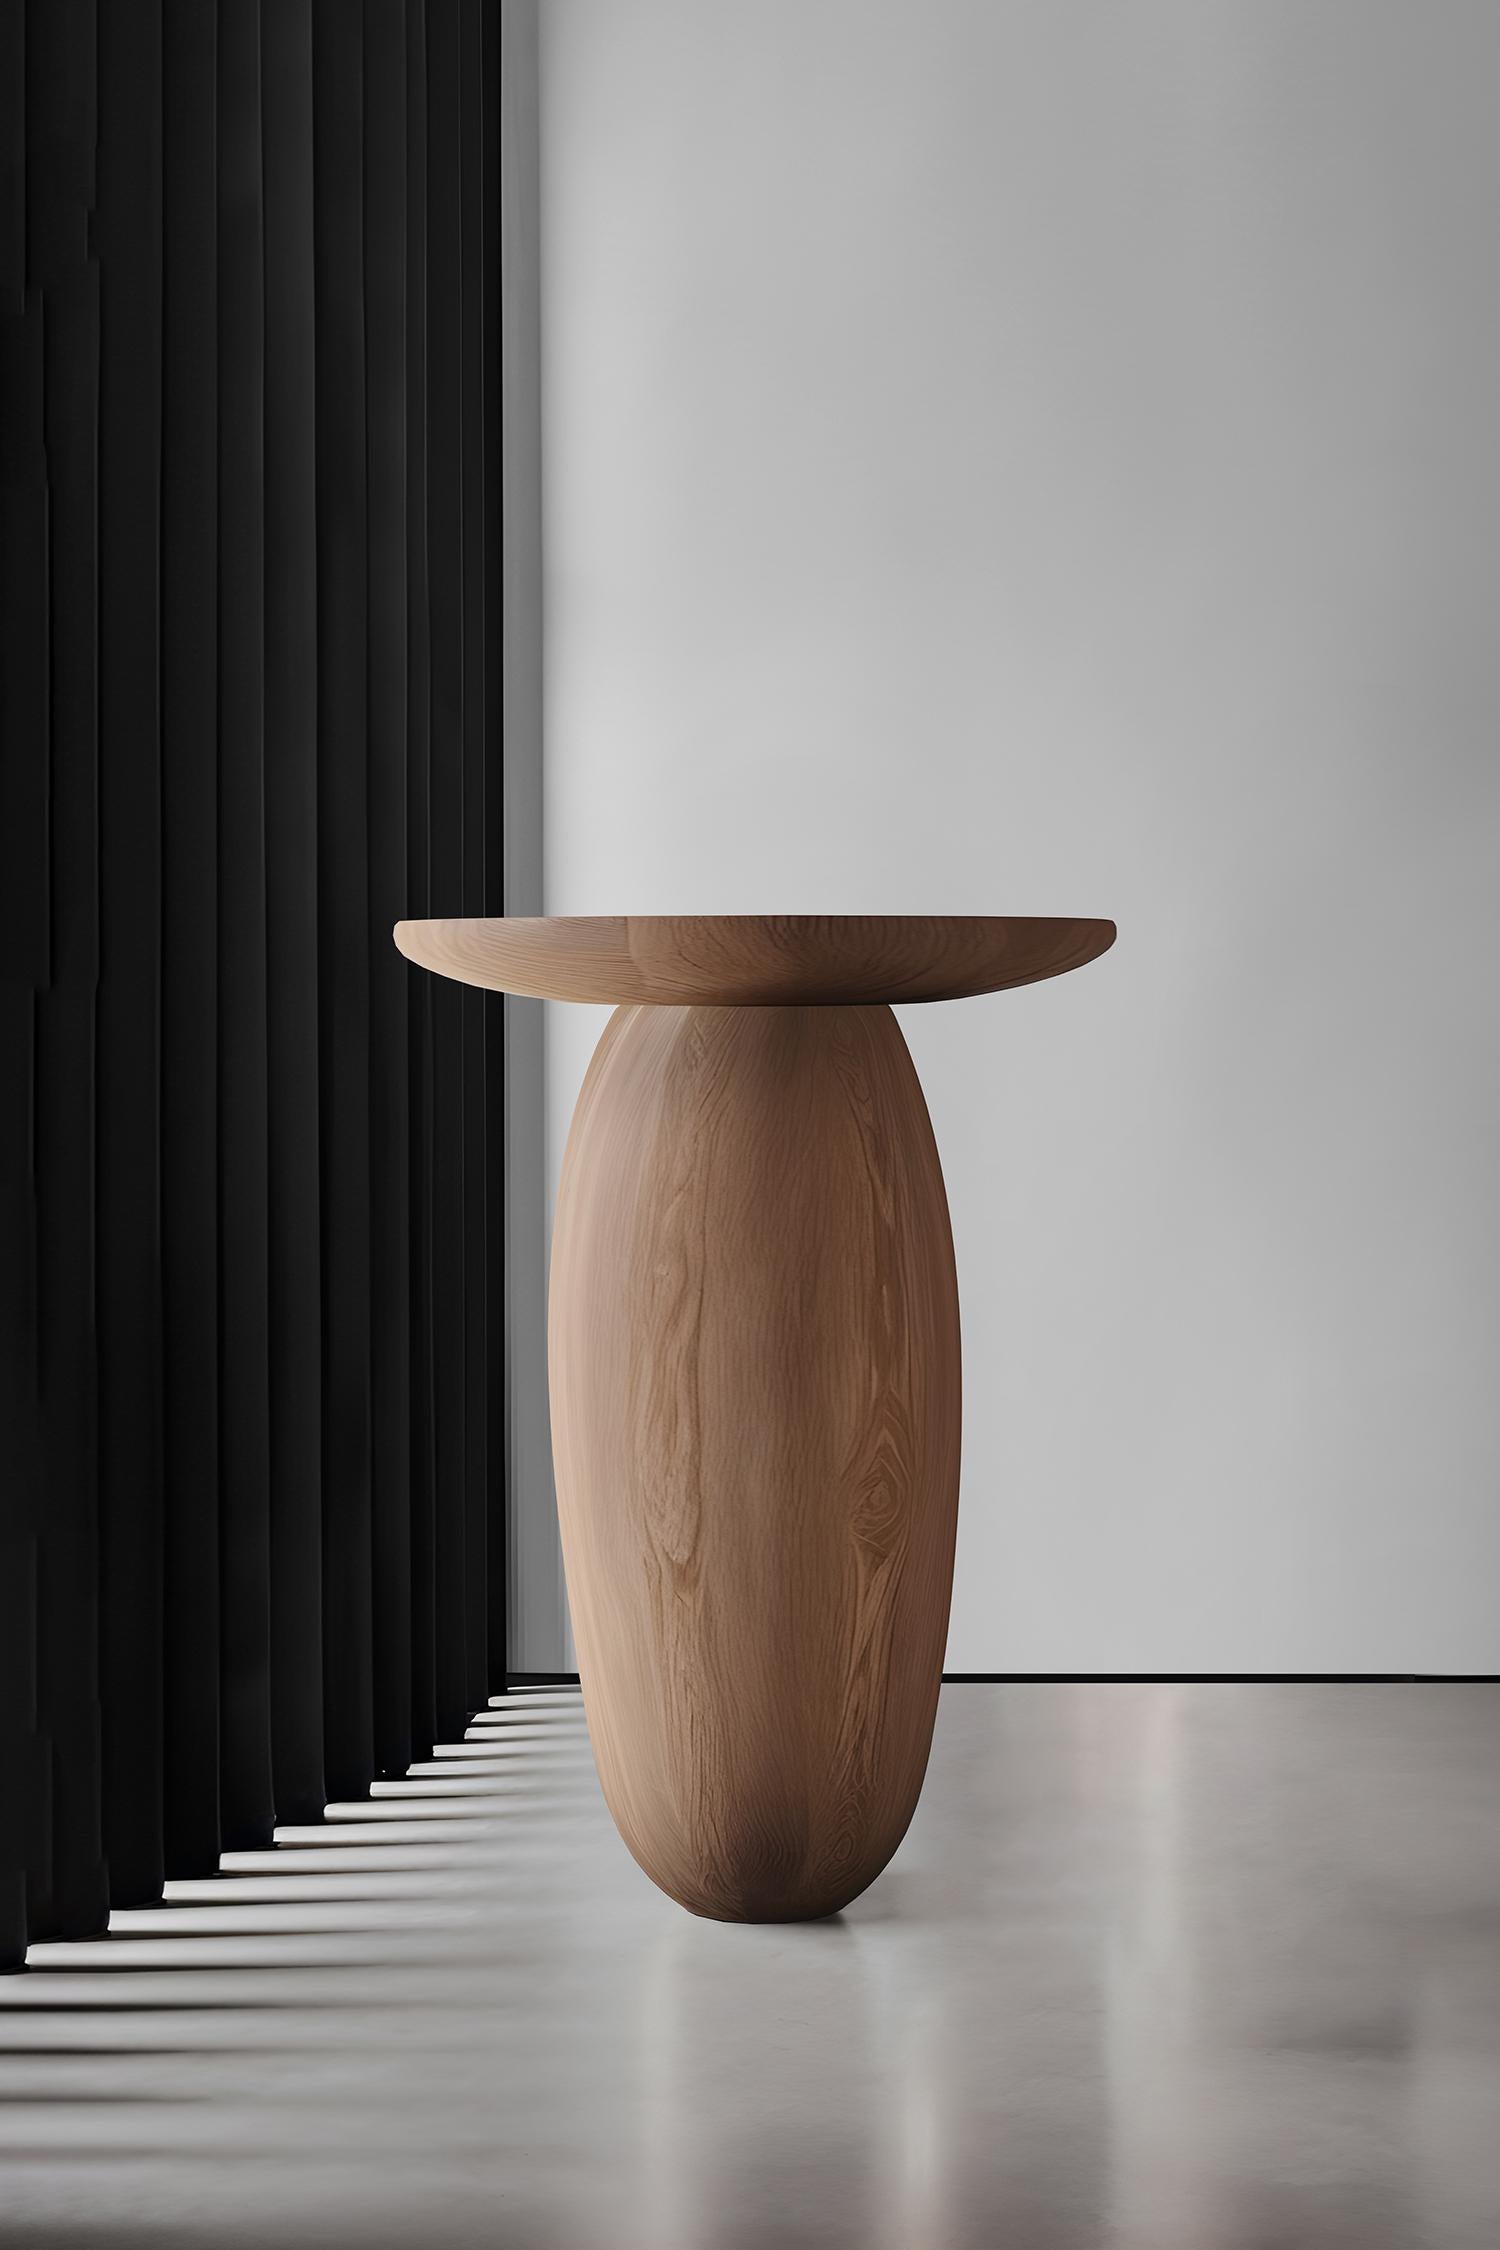 Introducing the Samu Collection by NONO, where simplicity meets elegance in the form of sculptural stools, side tables, and plinths. Each piece in this collection boasts a gently domed and smooth circular top, paired with a uniquely shaped base.